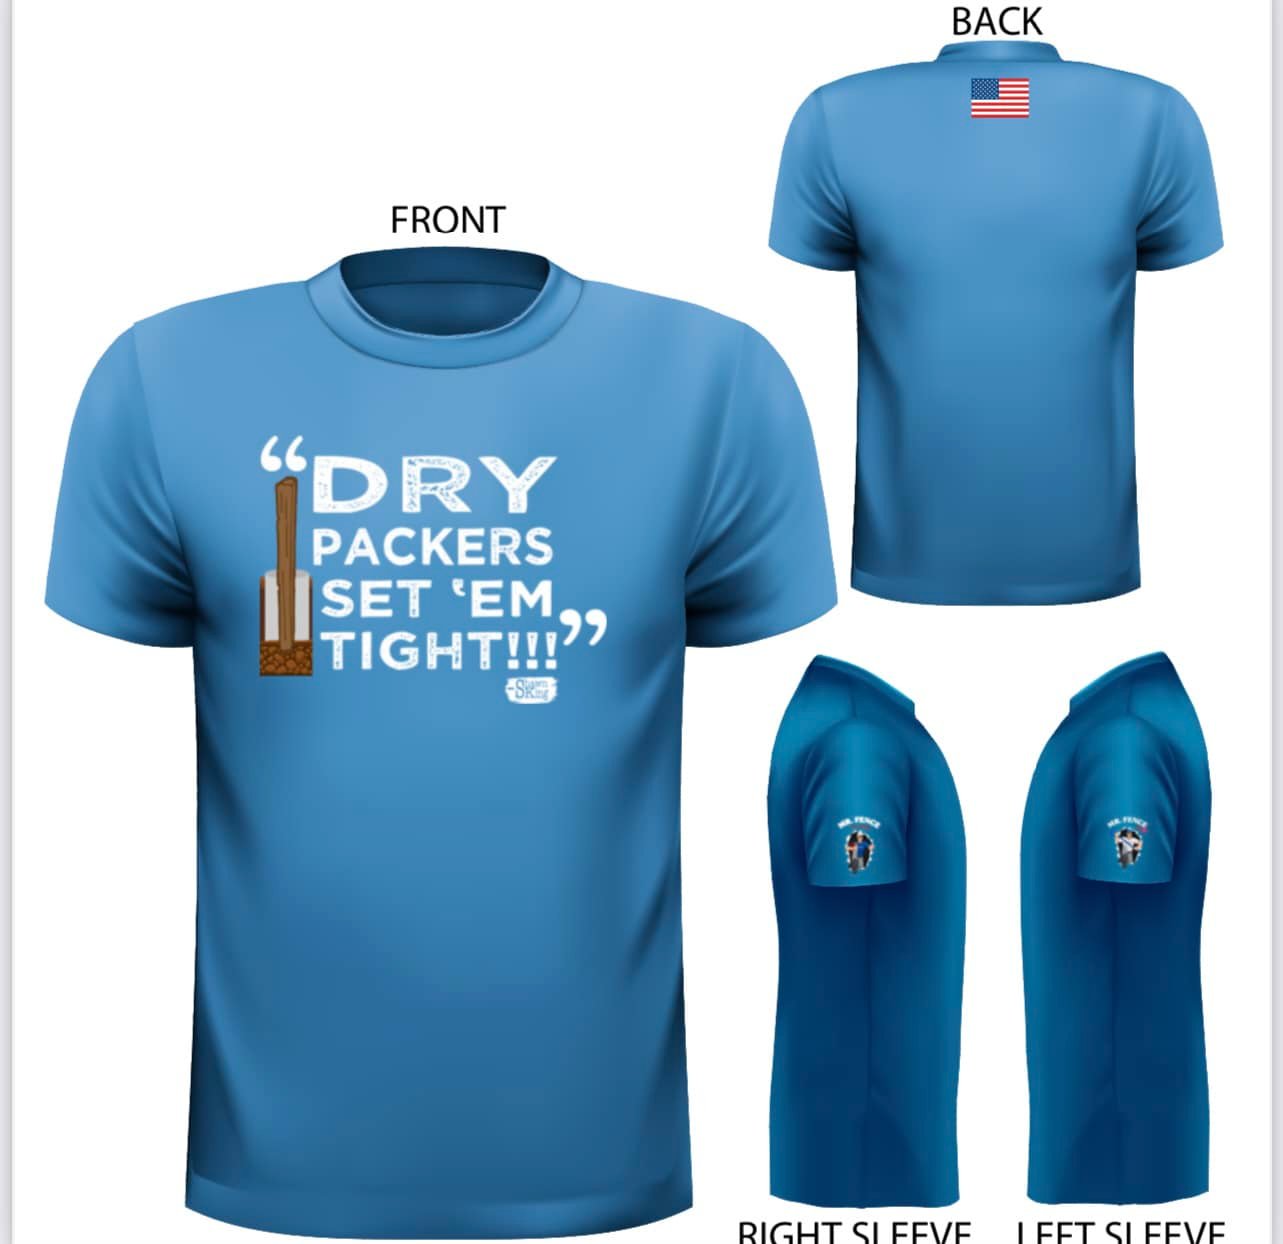 Dry Packers T-Shirt